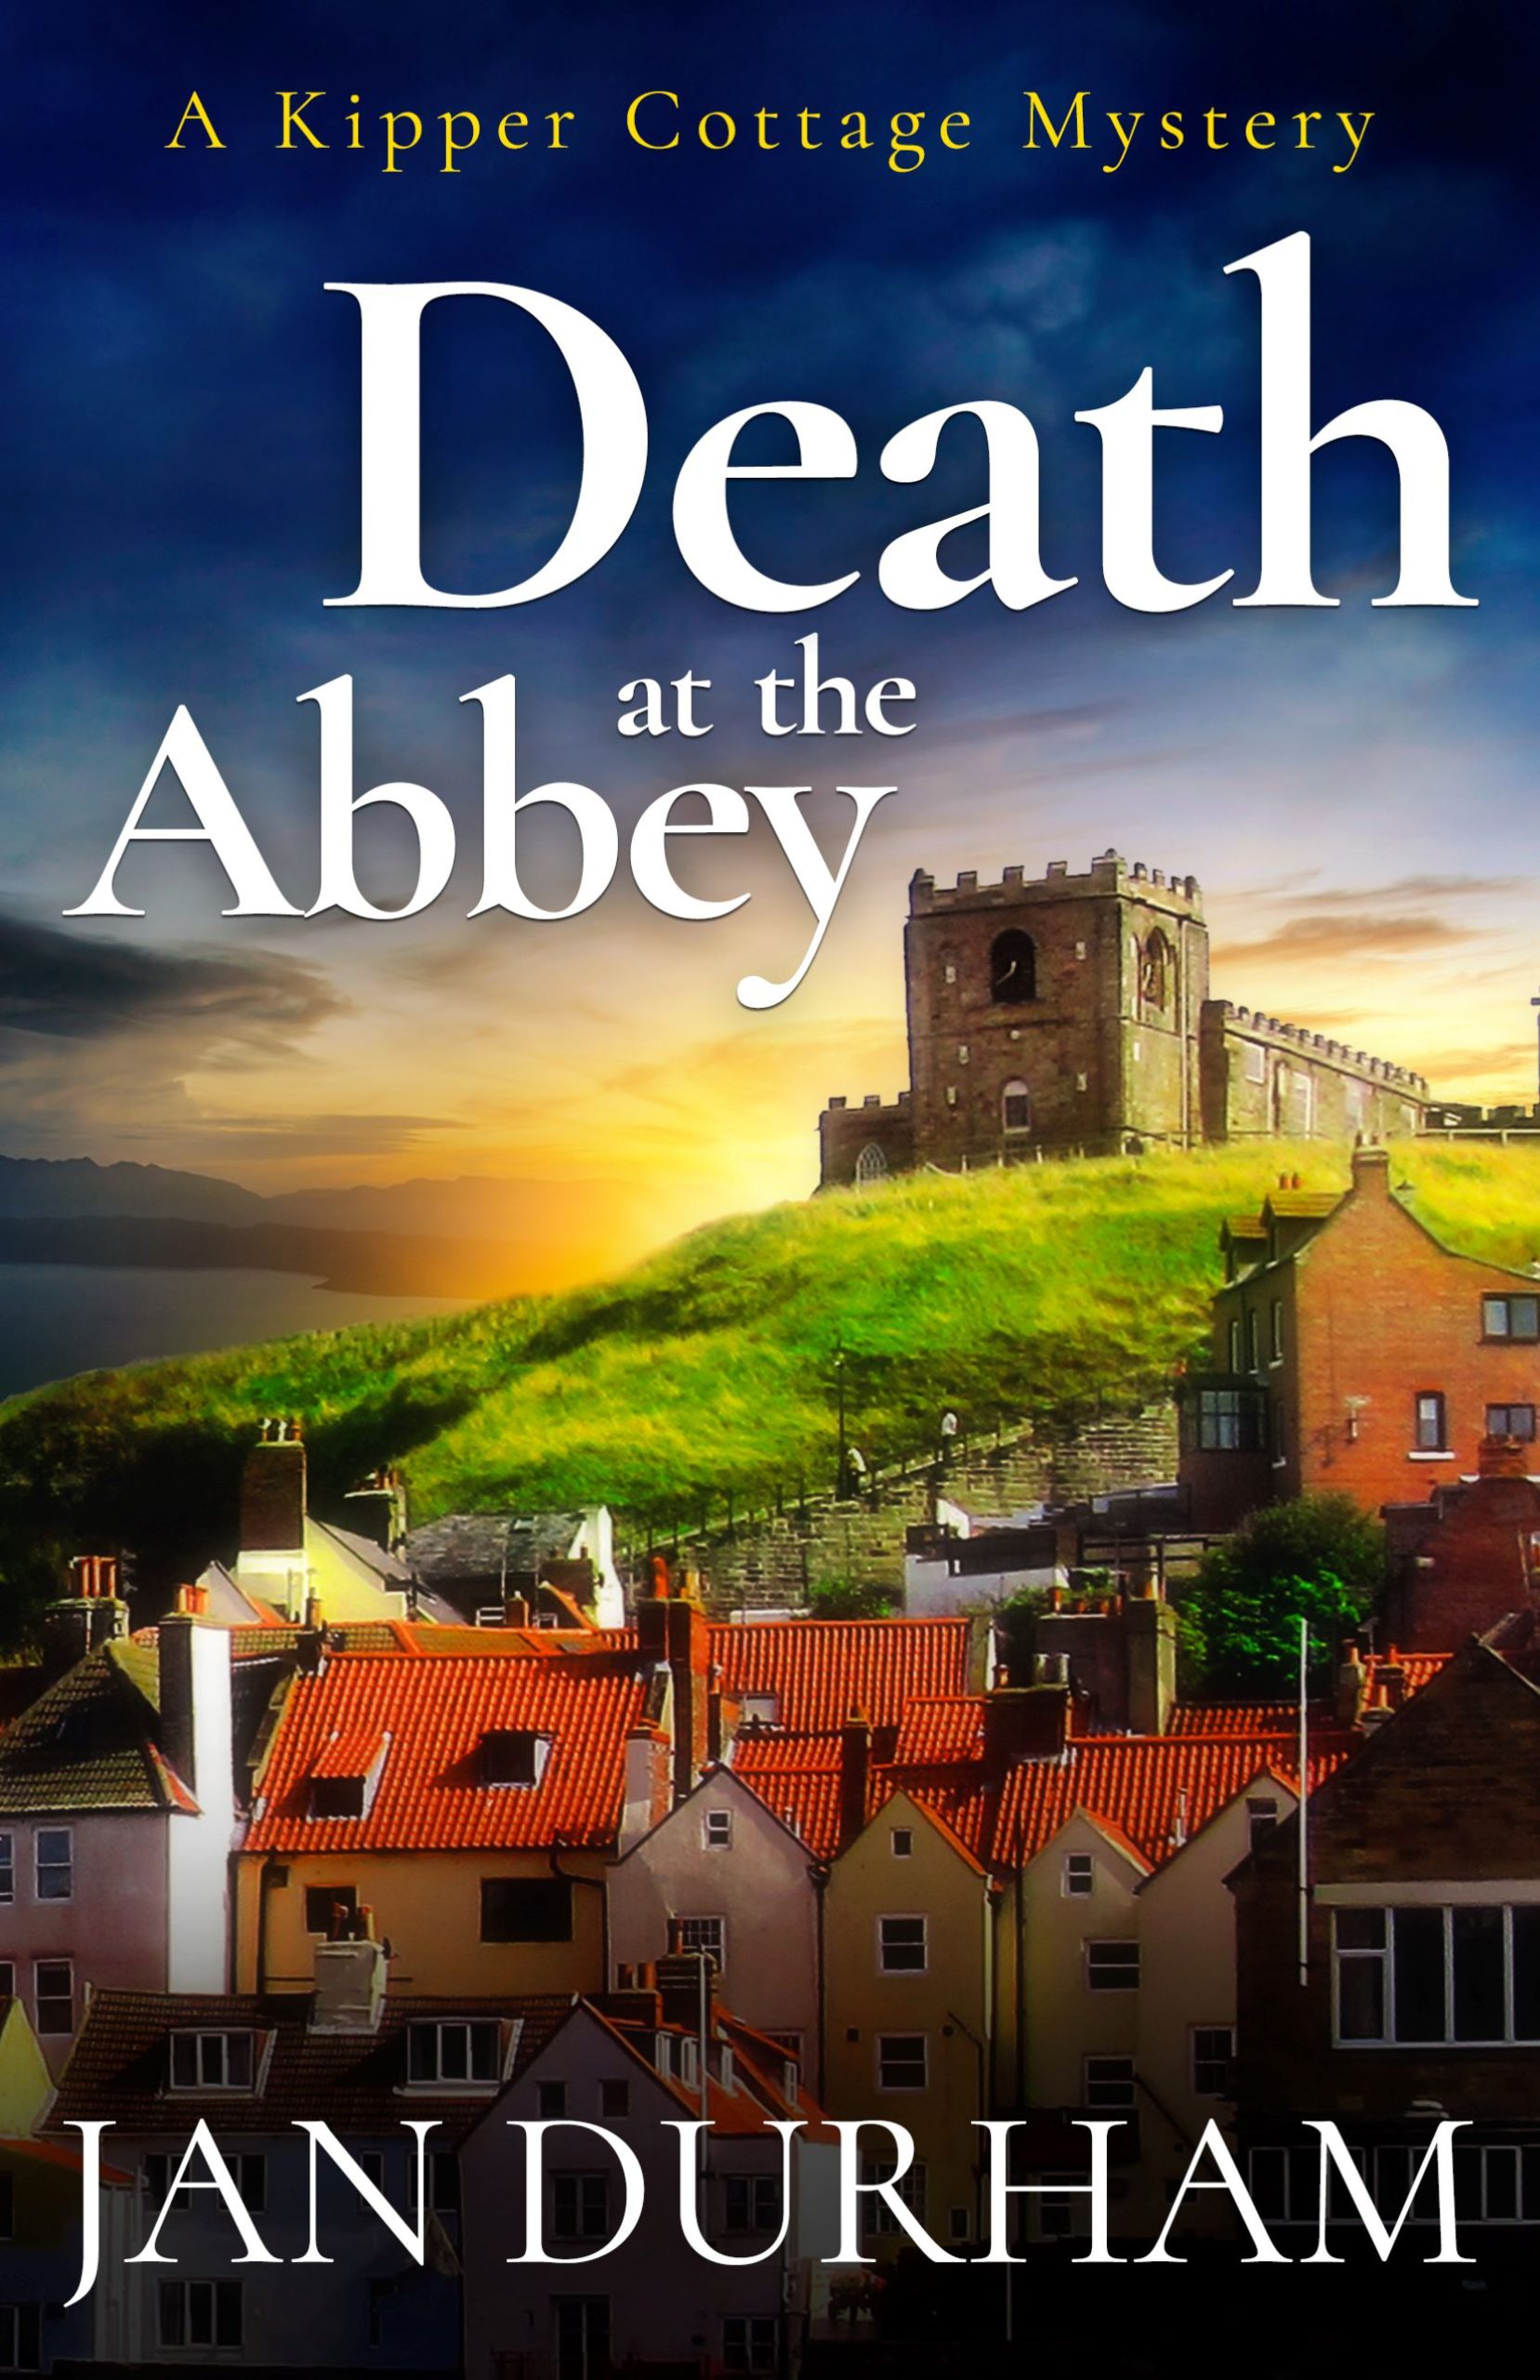 JAN DURHAM NEW RELEASE – DEATH AT THE ABBEY